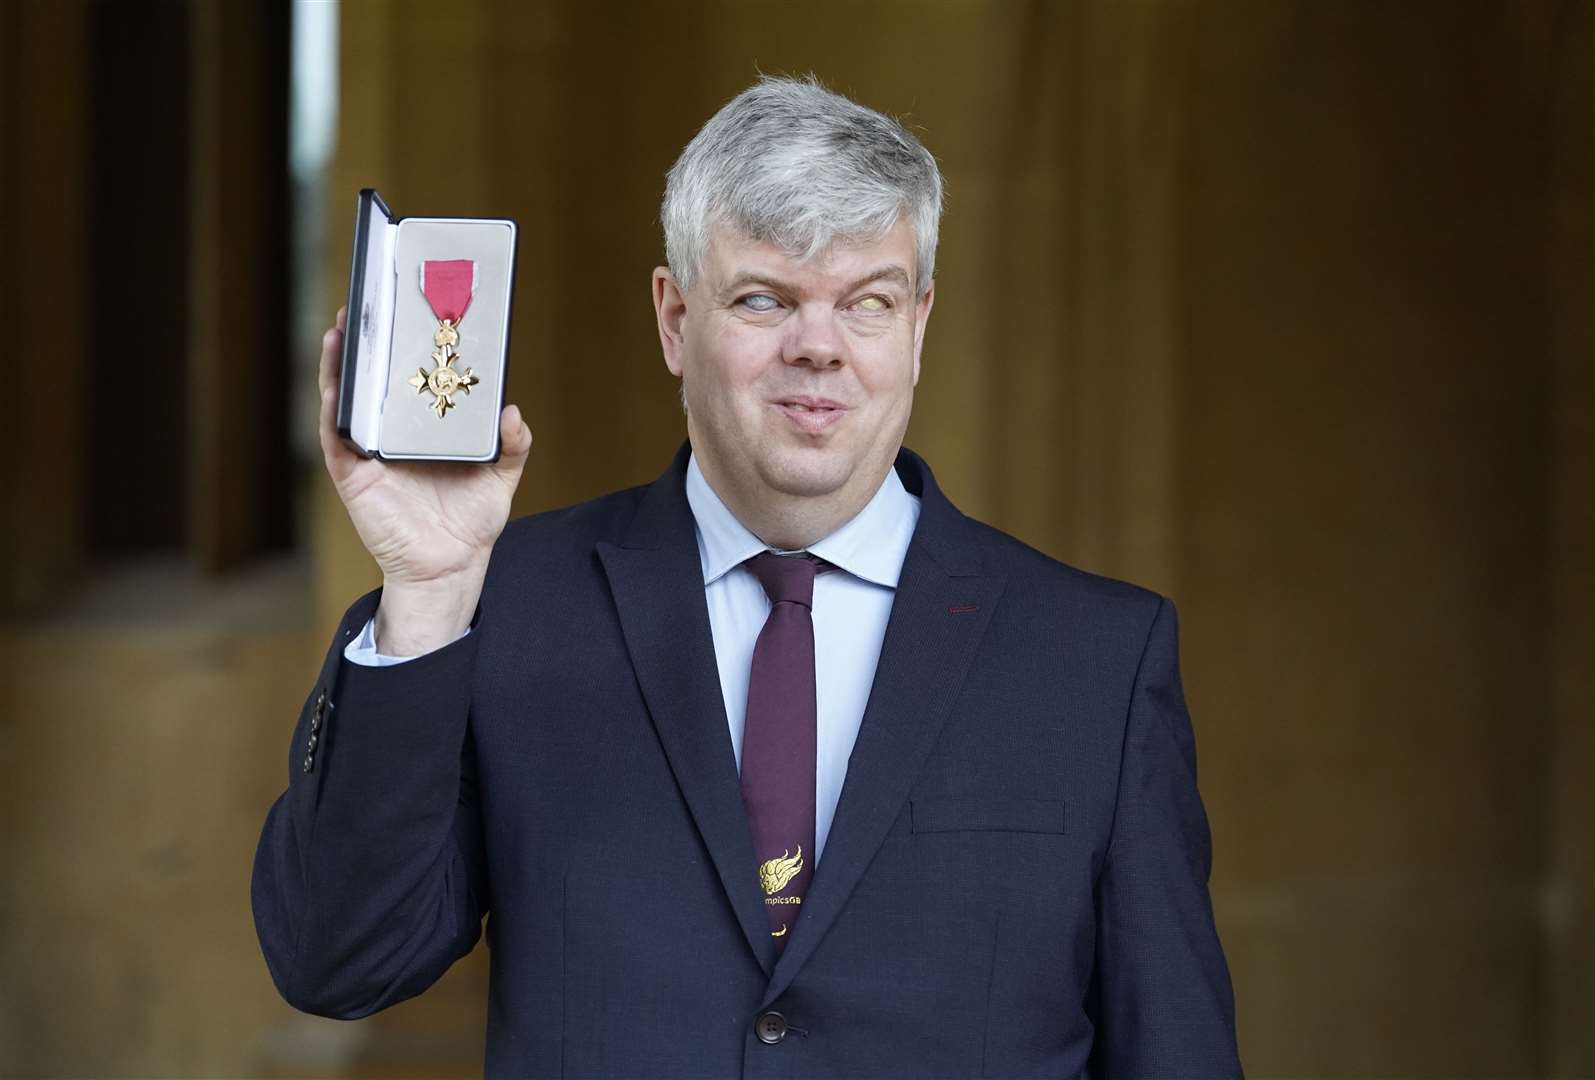 David Clarke, chief executive of the British Paralympic Association, after being made an Officer of the Order of the British Empire (OBE) for services to Paralympic Sport, by the Princess Royal (Andrew Matthews/PA).